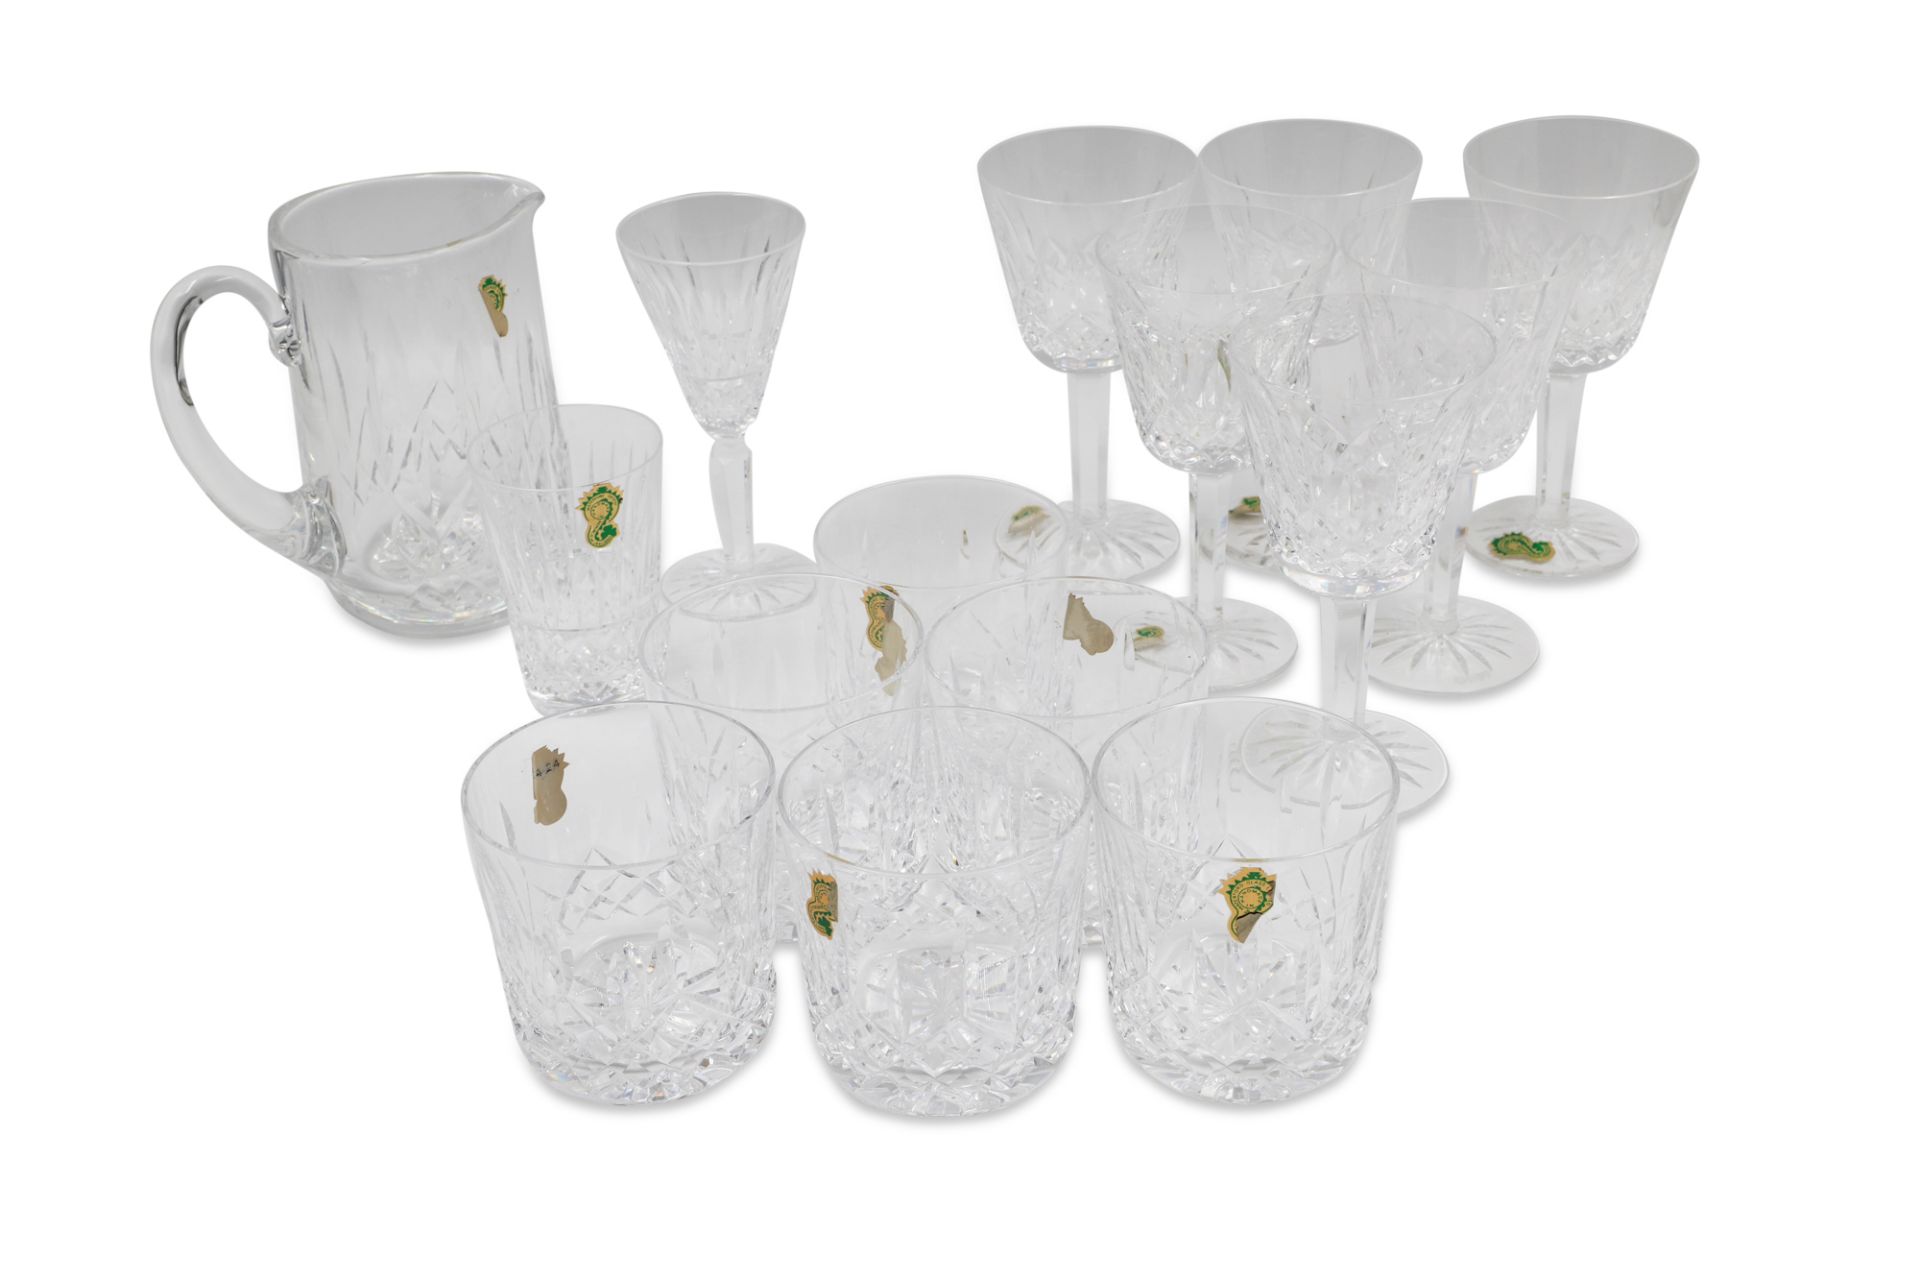 A MATCHING SET OF MODERN WATERFORD CRYSTAL DRINKING GLASSWARE, comprising six wine glasses, six